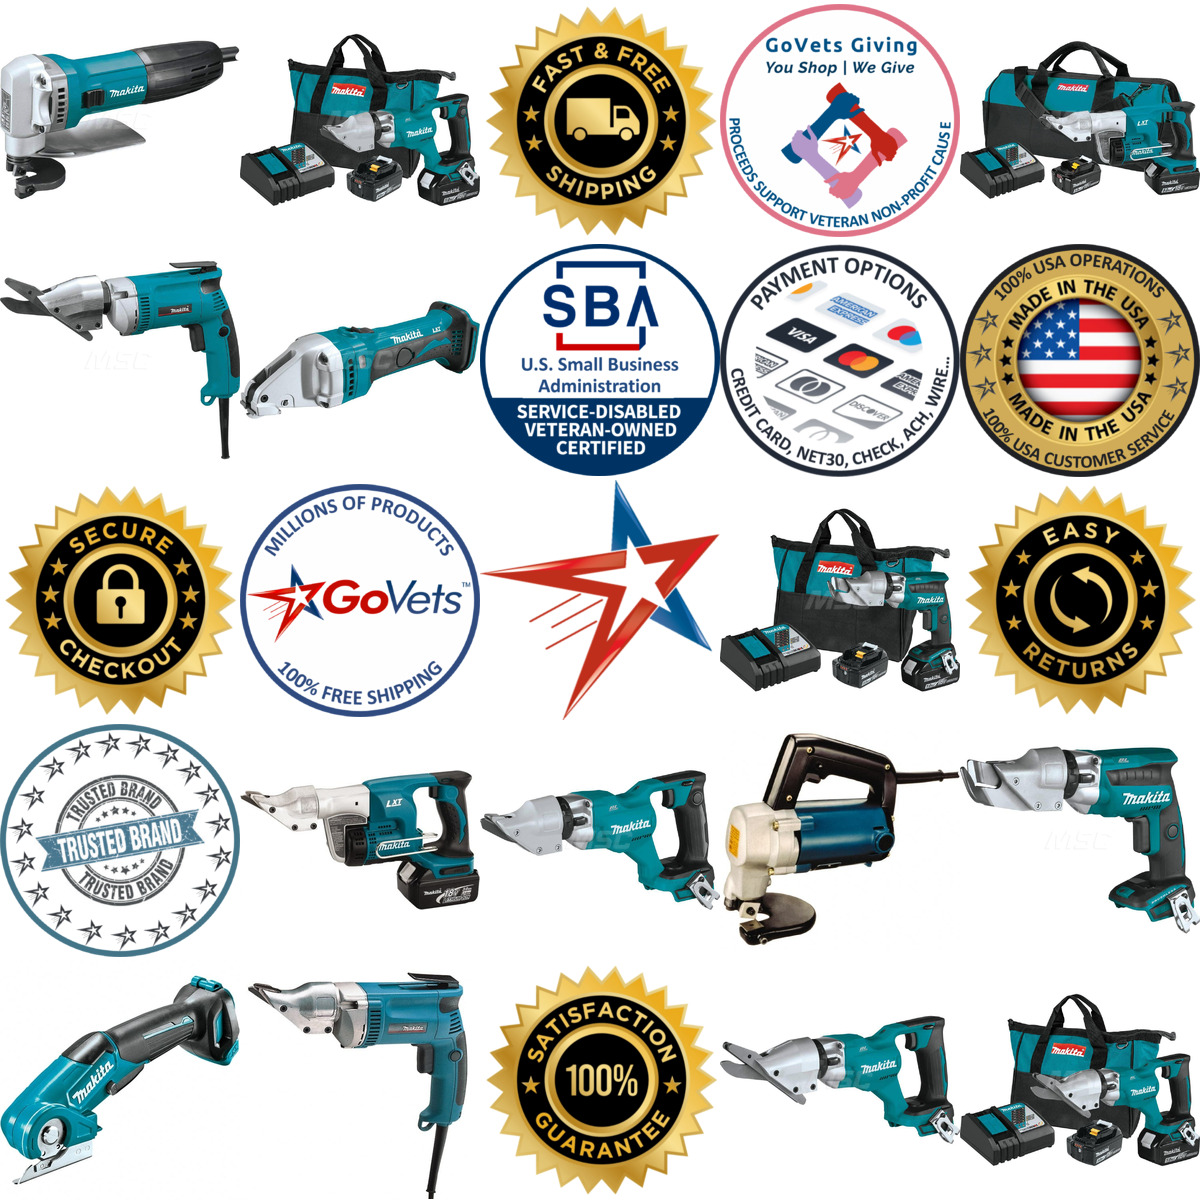 A selection of Makita products on GoVets